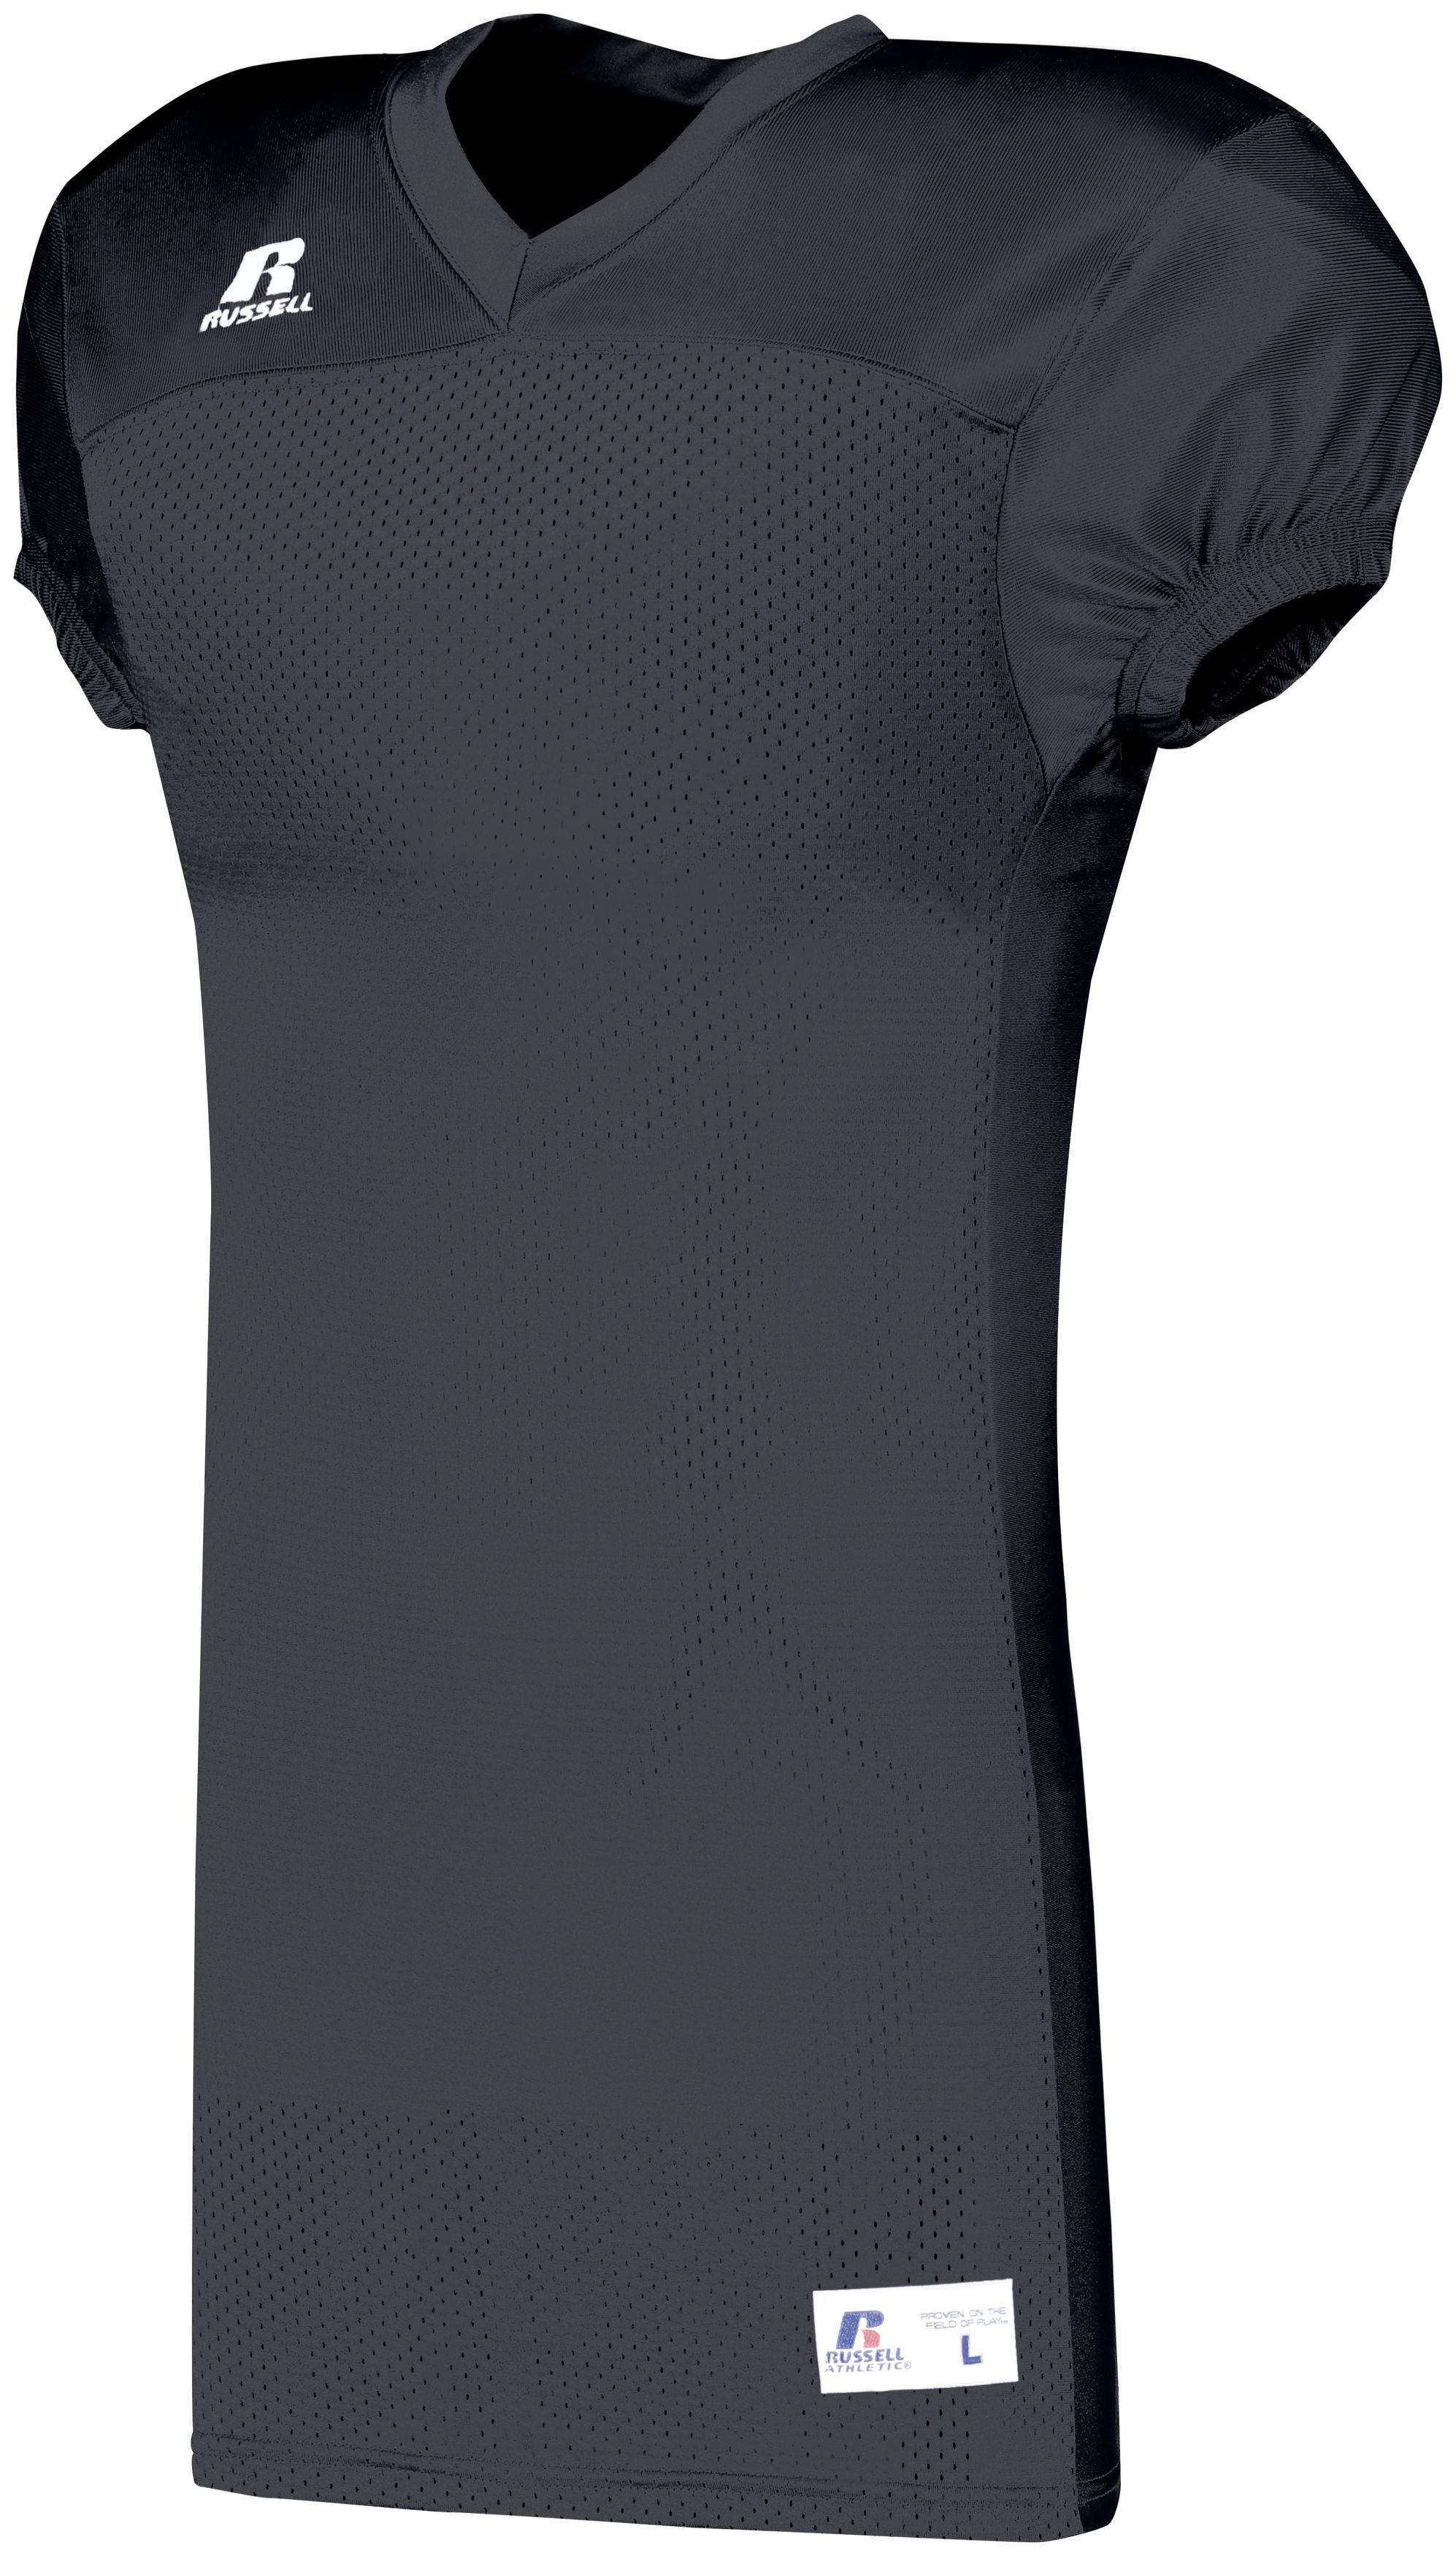 Russell Athletic Youth Solid Jersey With Side Inserts in Stealth  -Part of the Youth, Youth-Jersey, Football, Russell-Athletic-Products, Shirts, All-Sports, All-Sports-1 product lines at KanaleyCreations.com